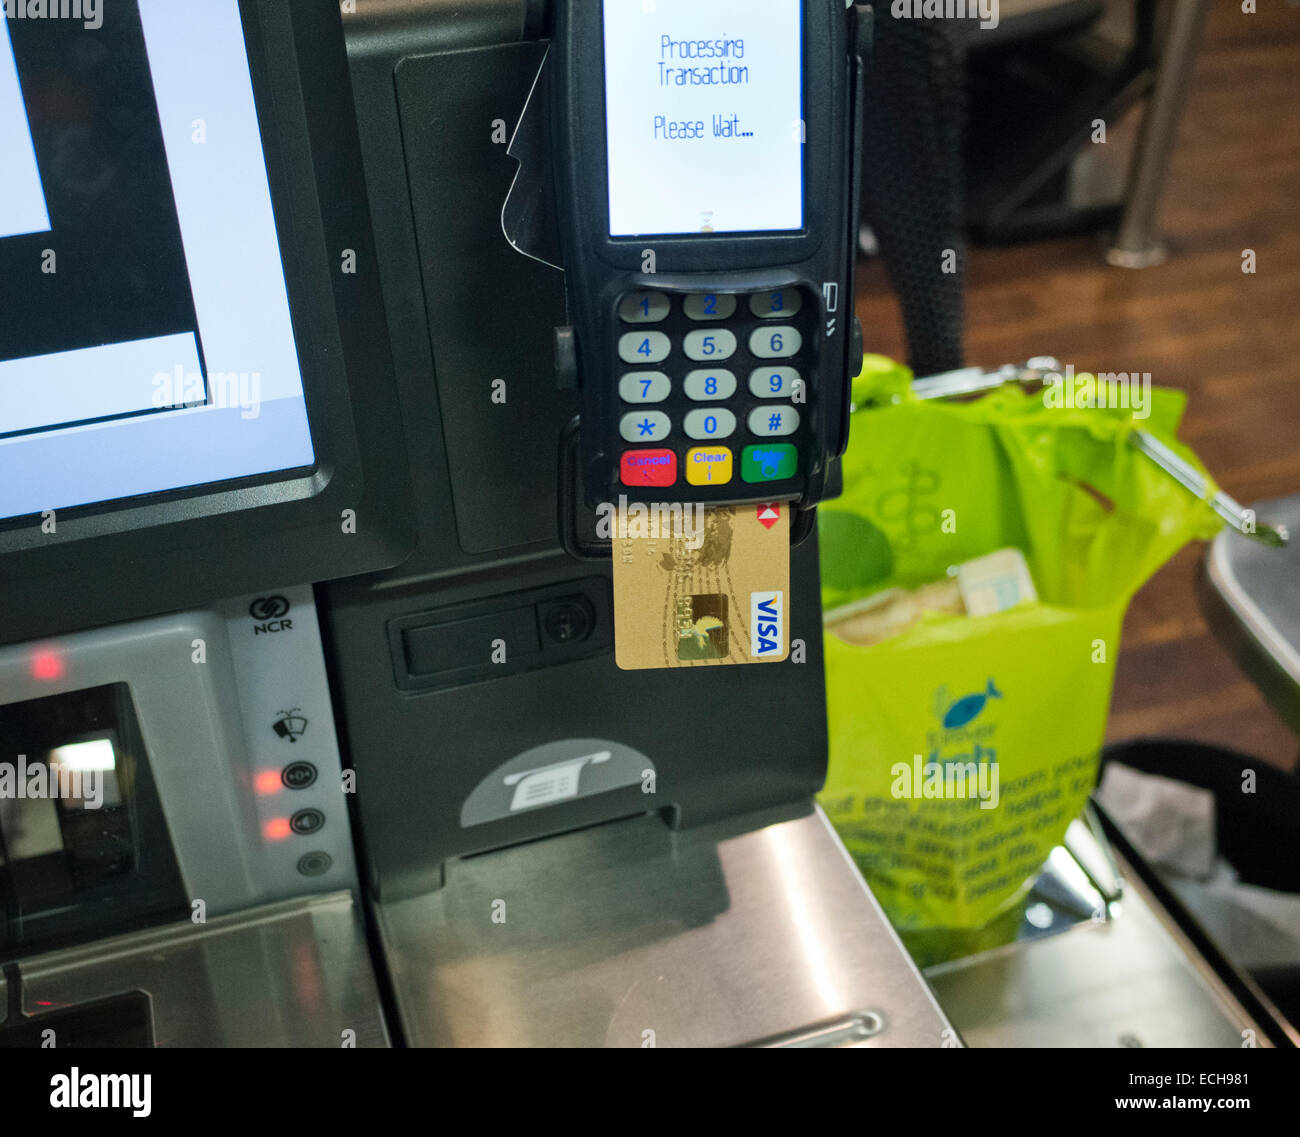 A self service checkout till at Marks and Spencer in Britain Stock Photo